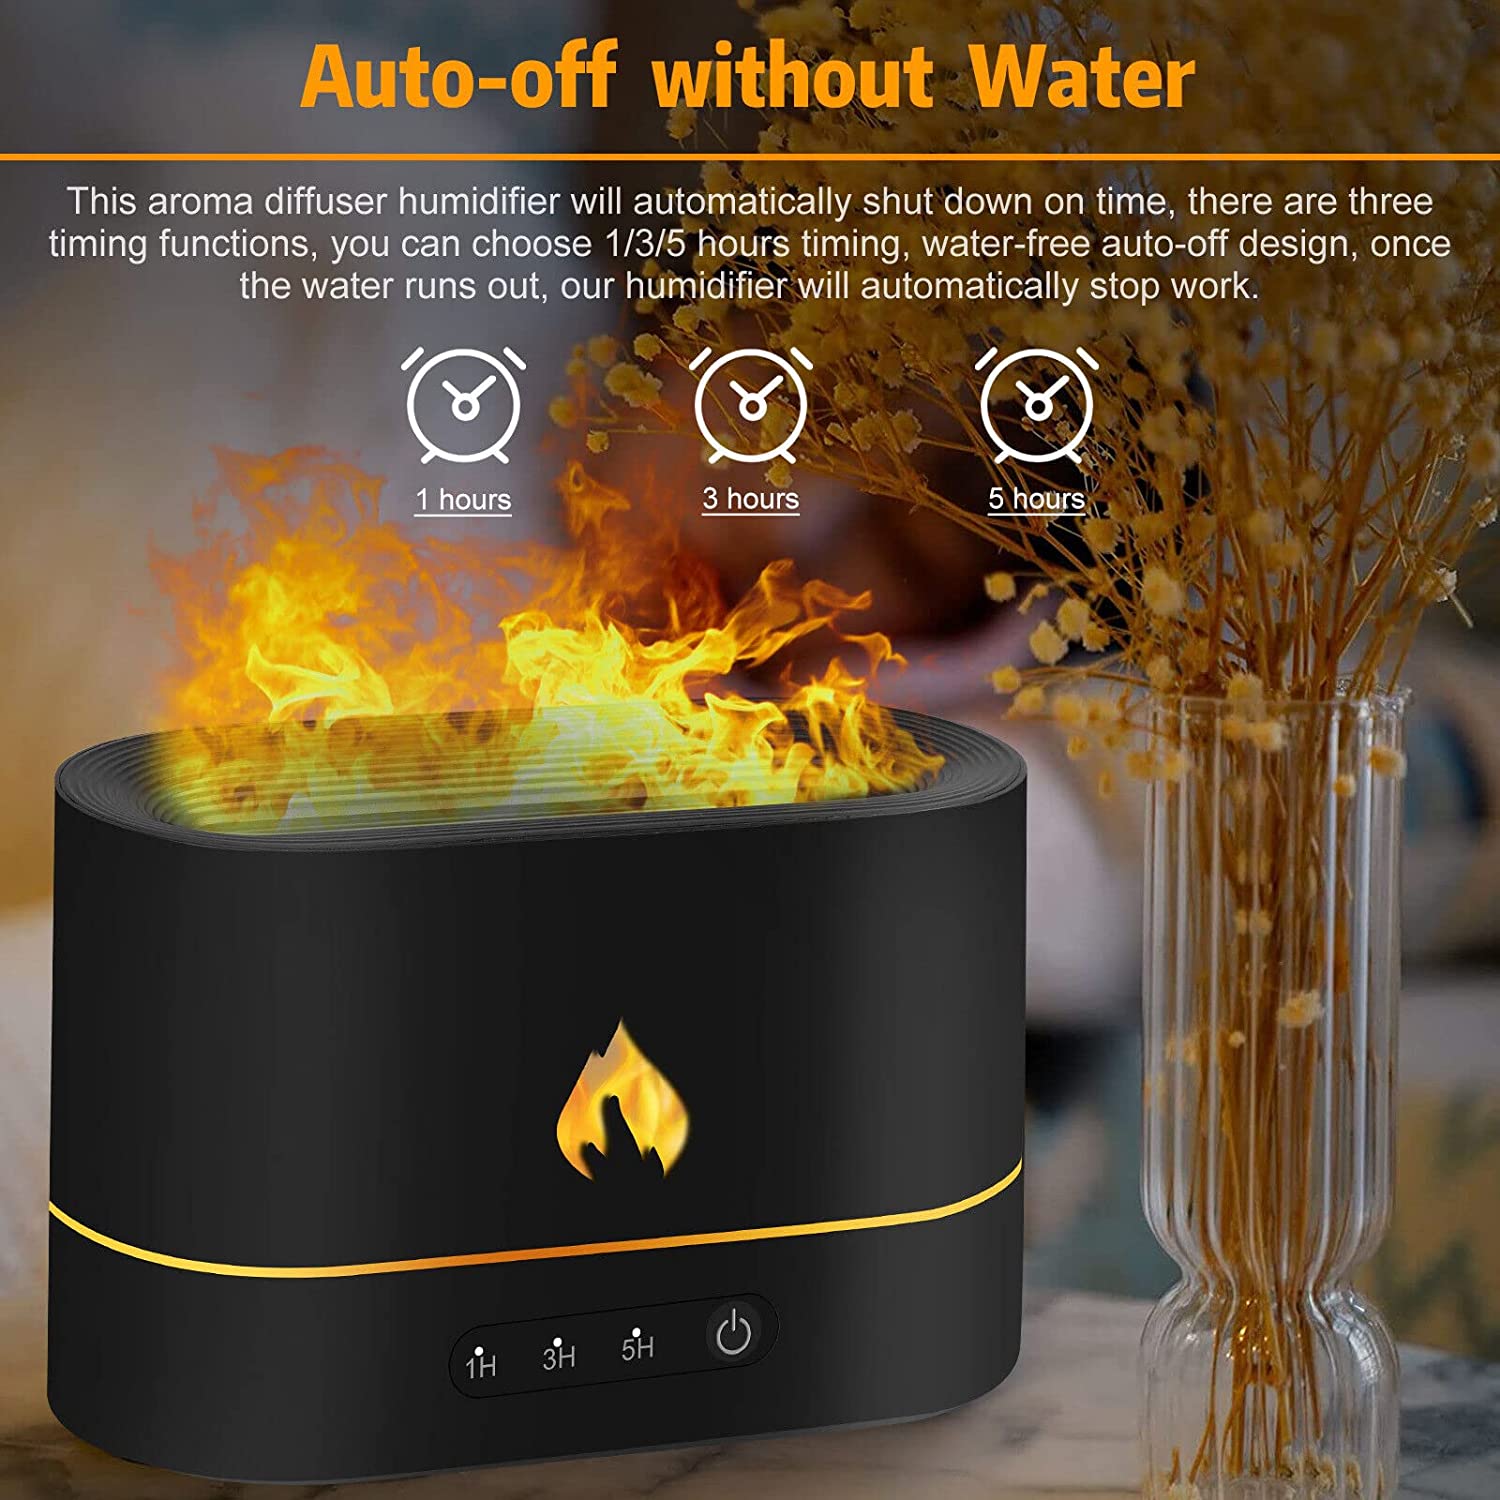 https://flameproduct.com/wp-content/uploads/2022/12/Flame-Effect-Aroma-Diffuser-4.jpg